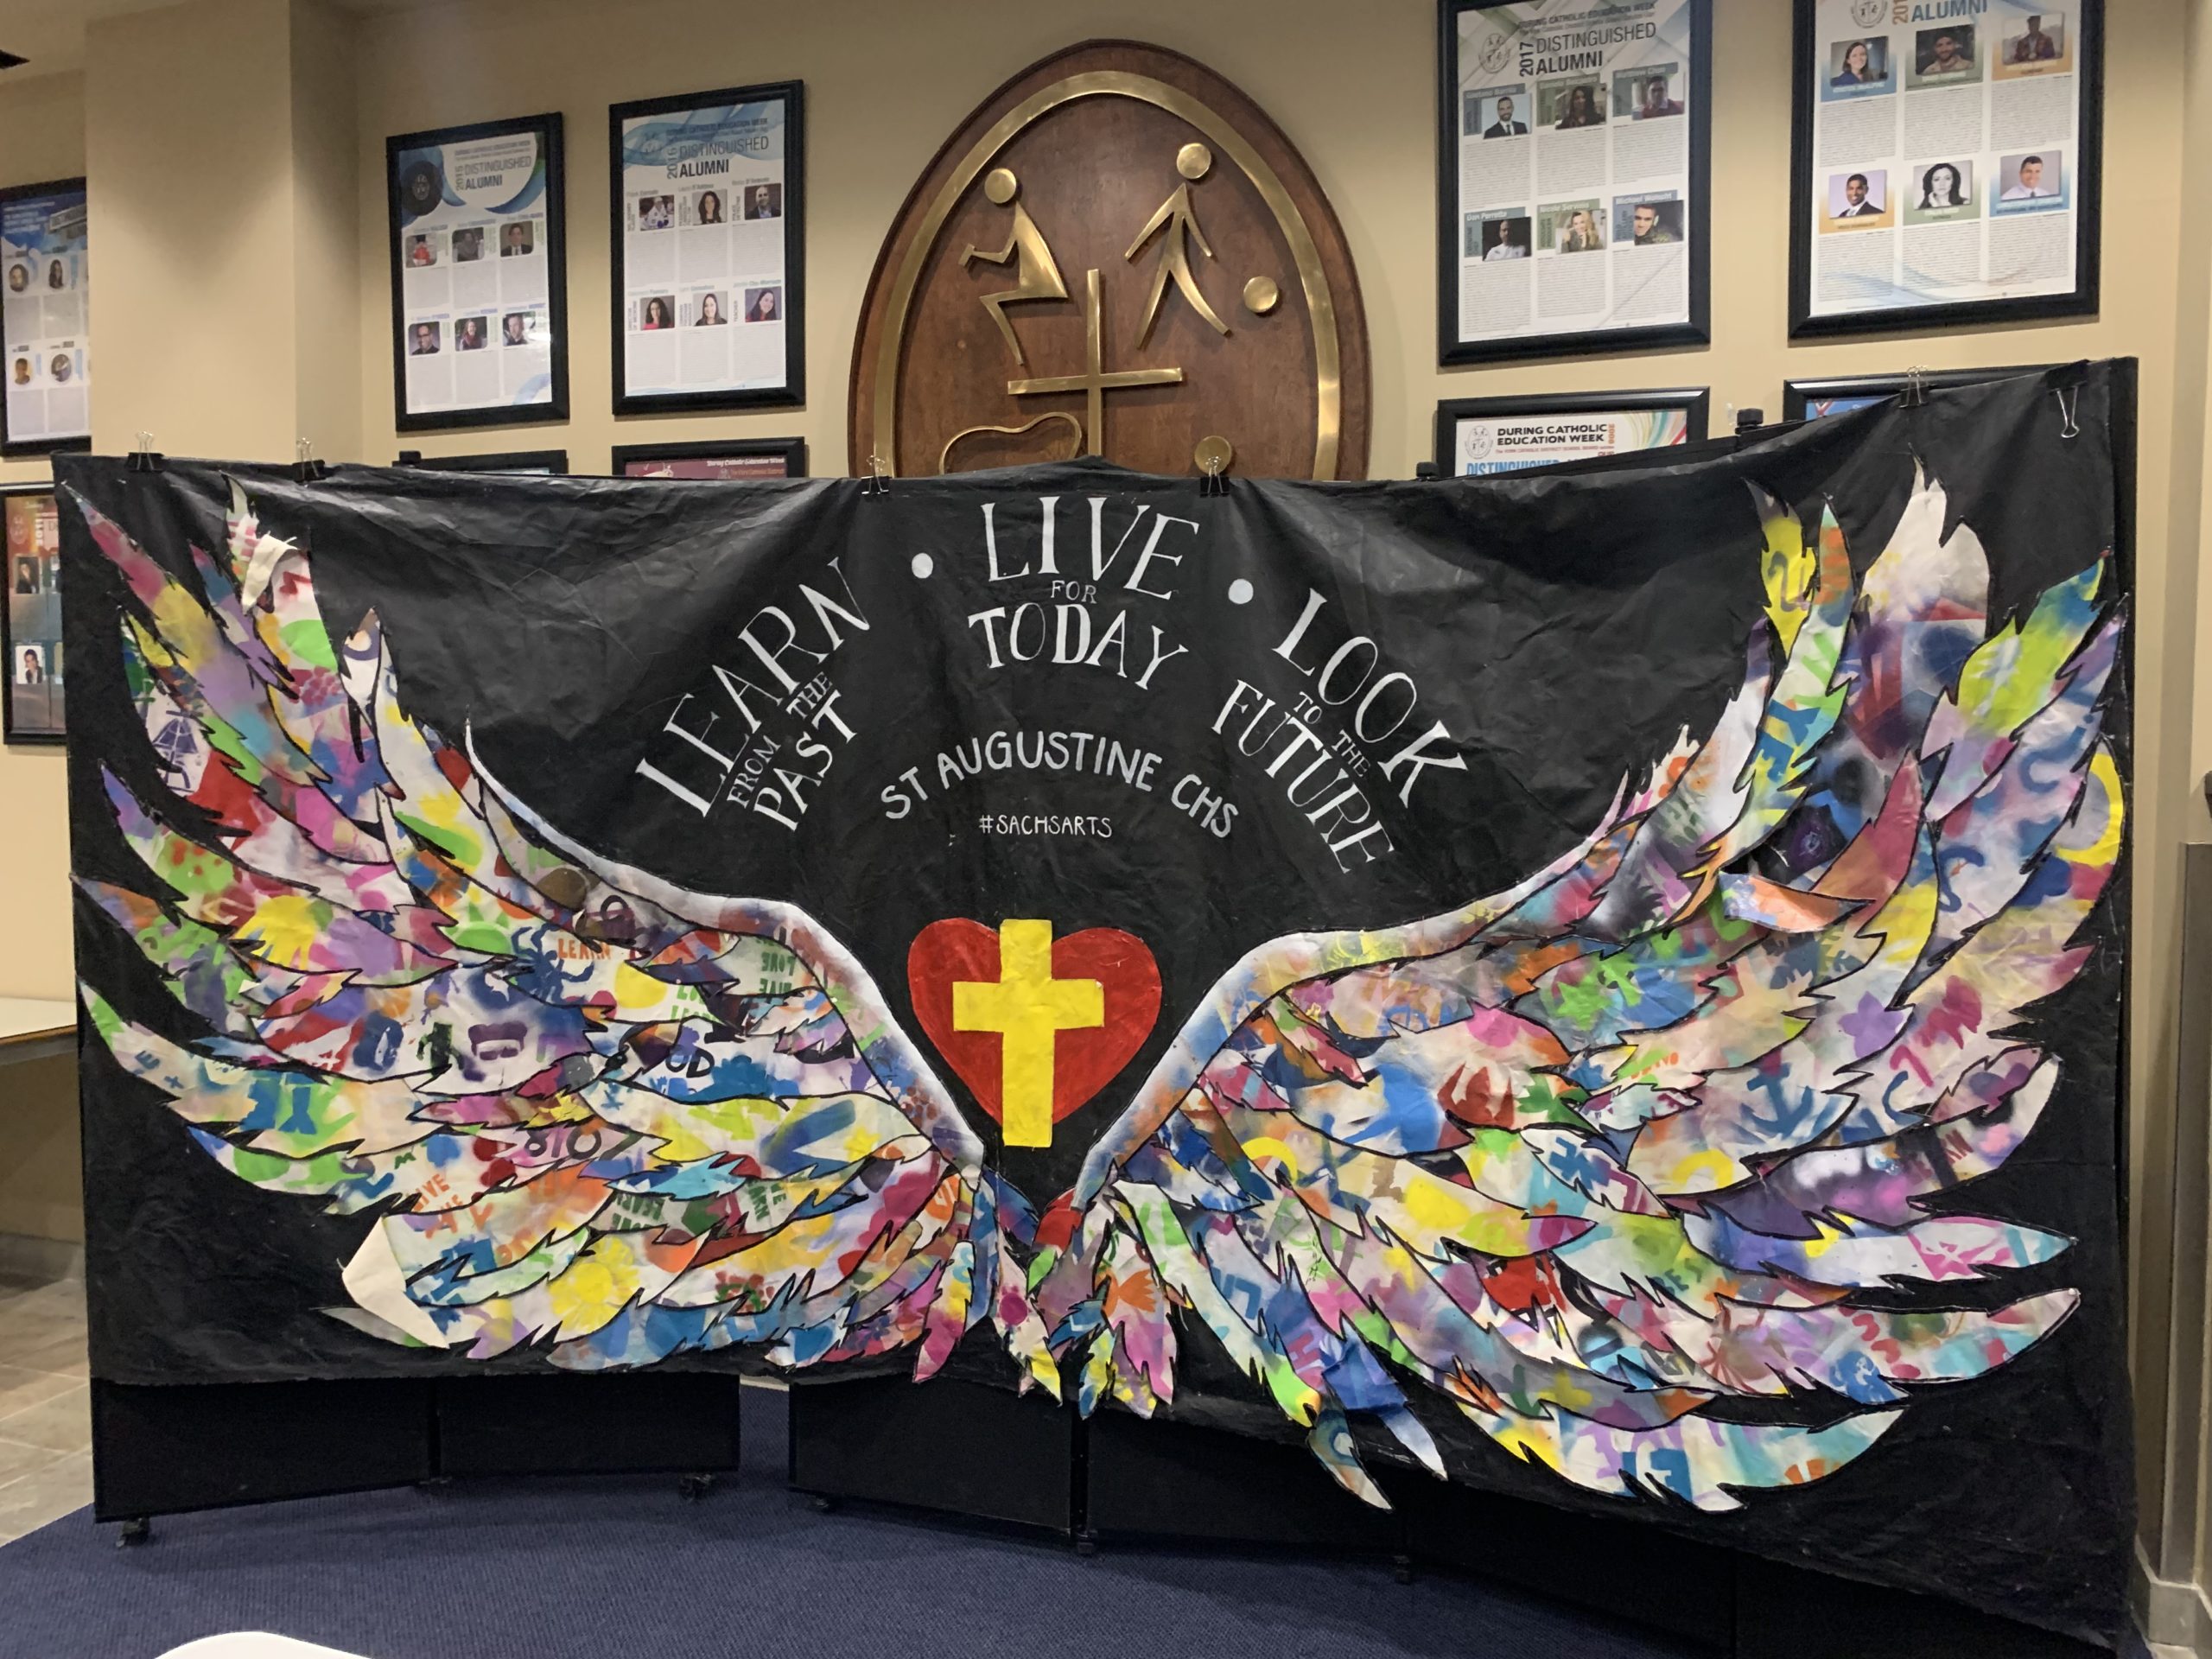 St Aug art show wings on display at CEC